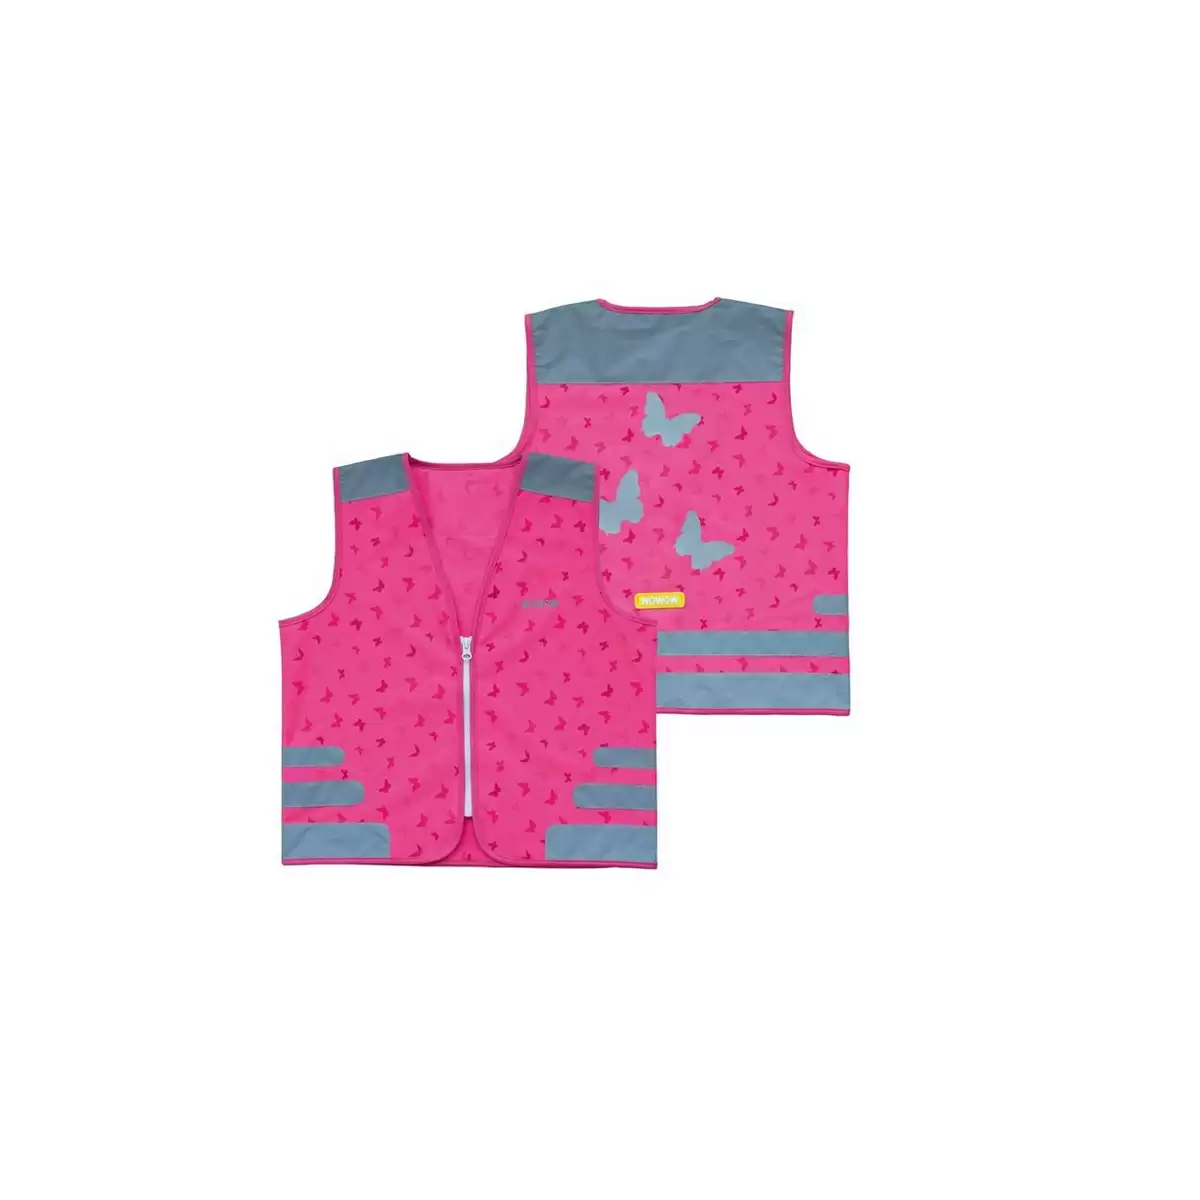 Nutty pink safety vest for children S Wowow Apparel accessories, High